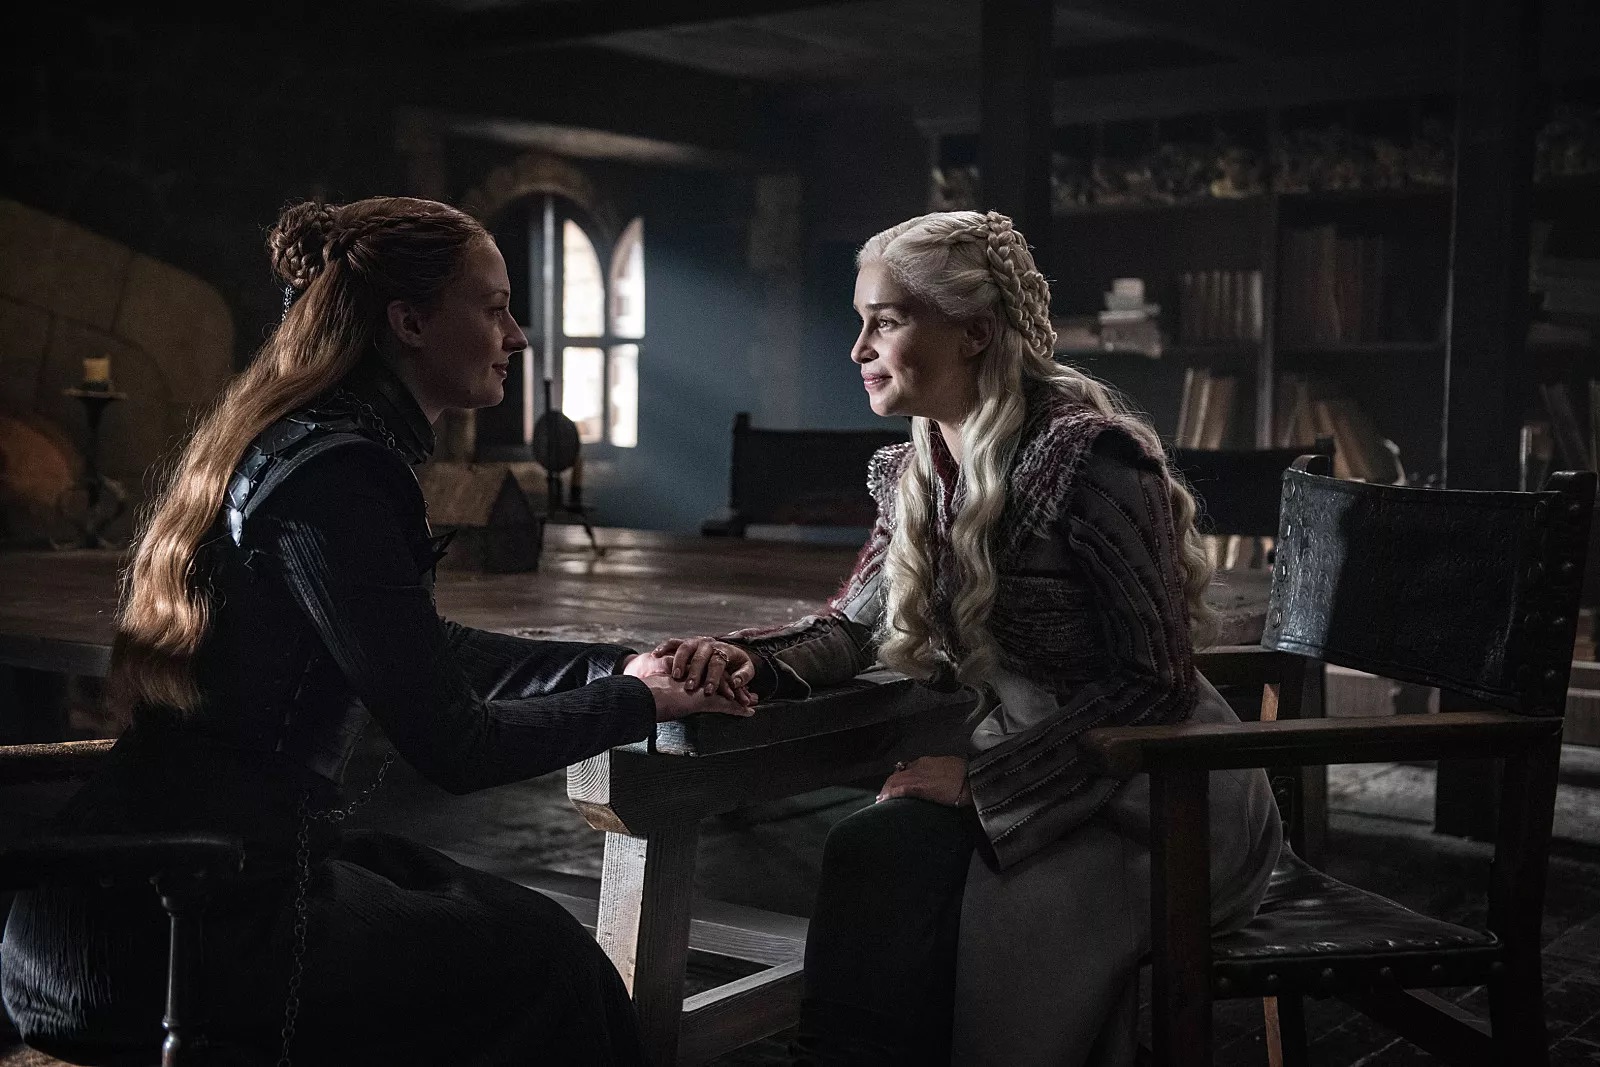 Sansa (Sophie Turner) and Dany (Emilia Clarke) have a brief moment of understanding in Winterfell on HBO's Game of Thrones